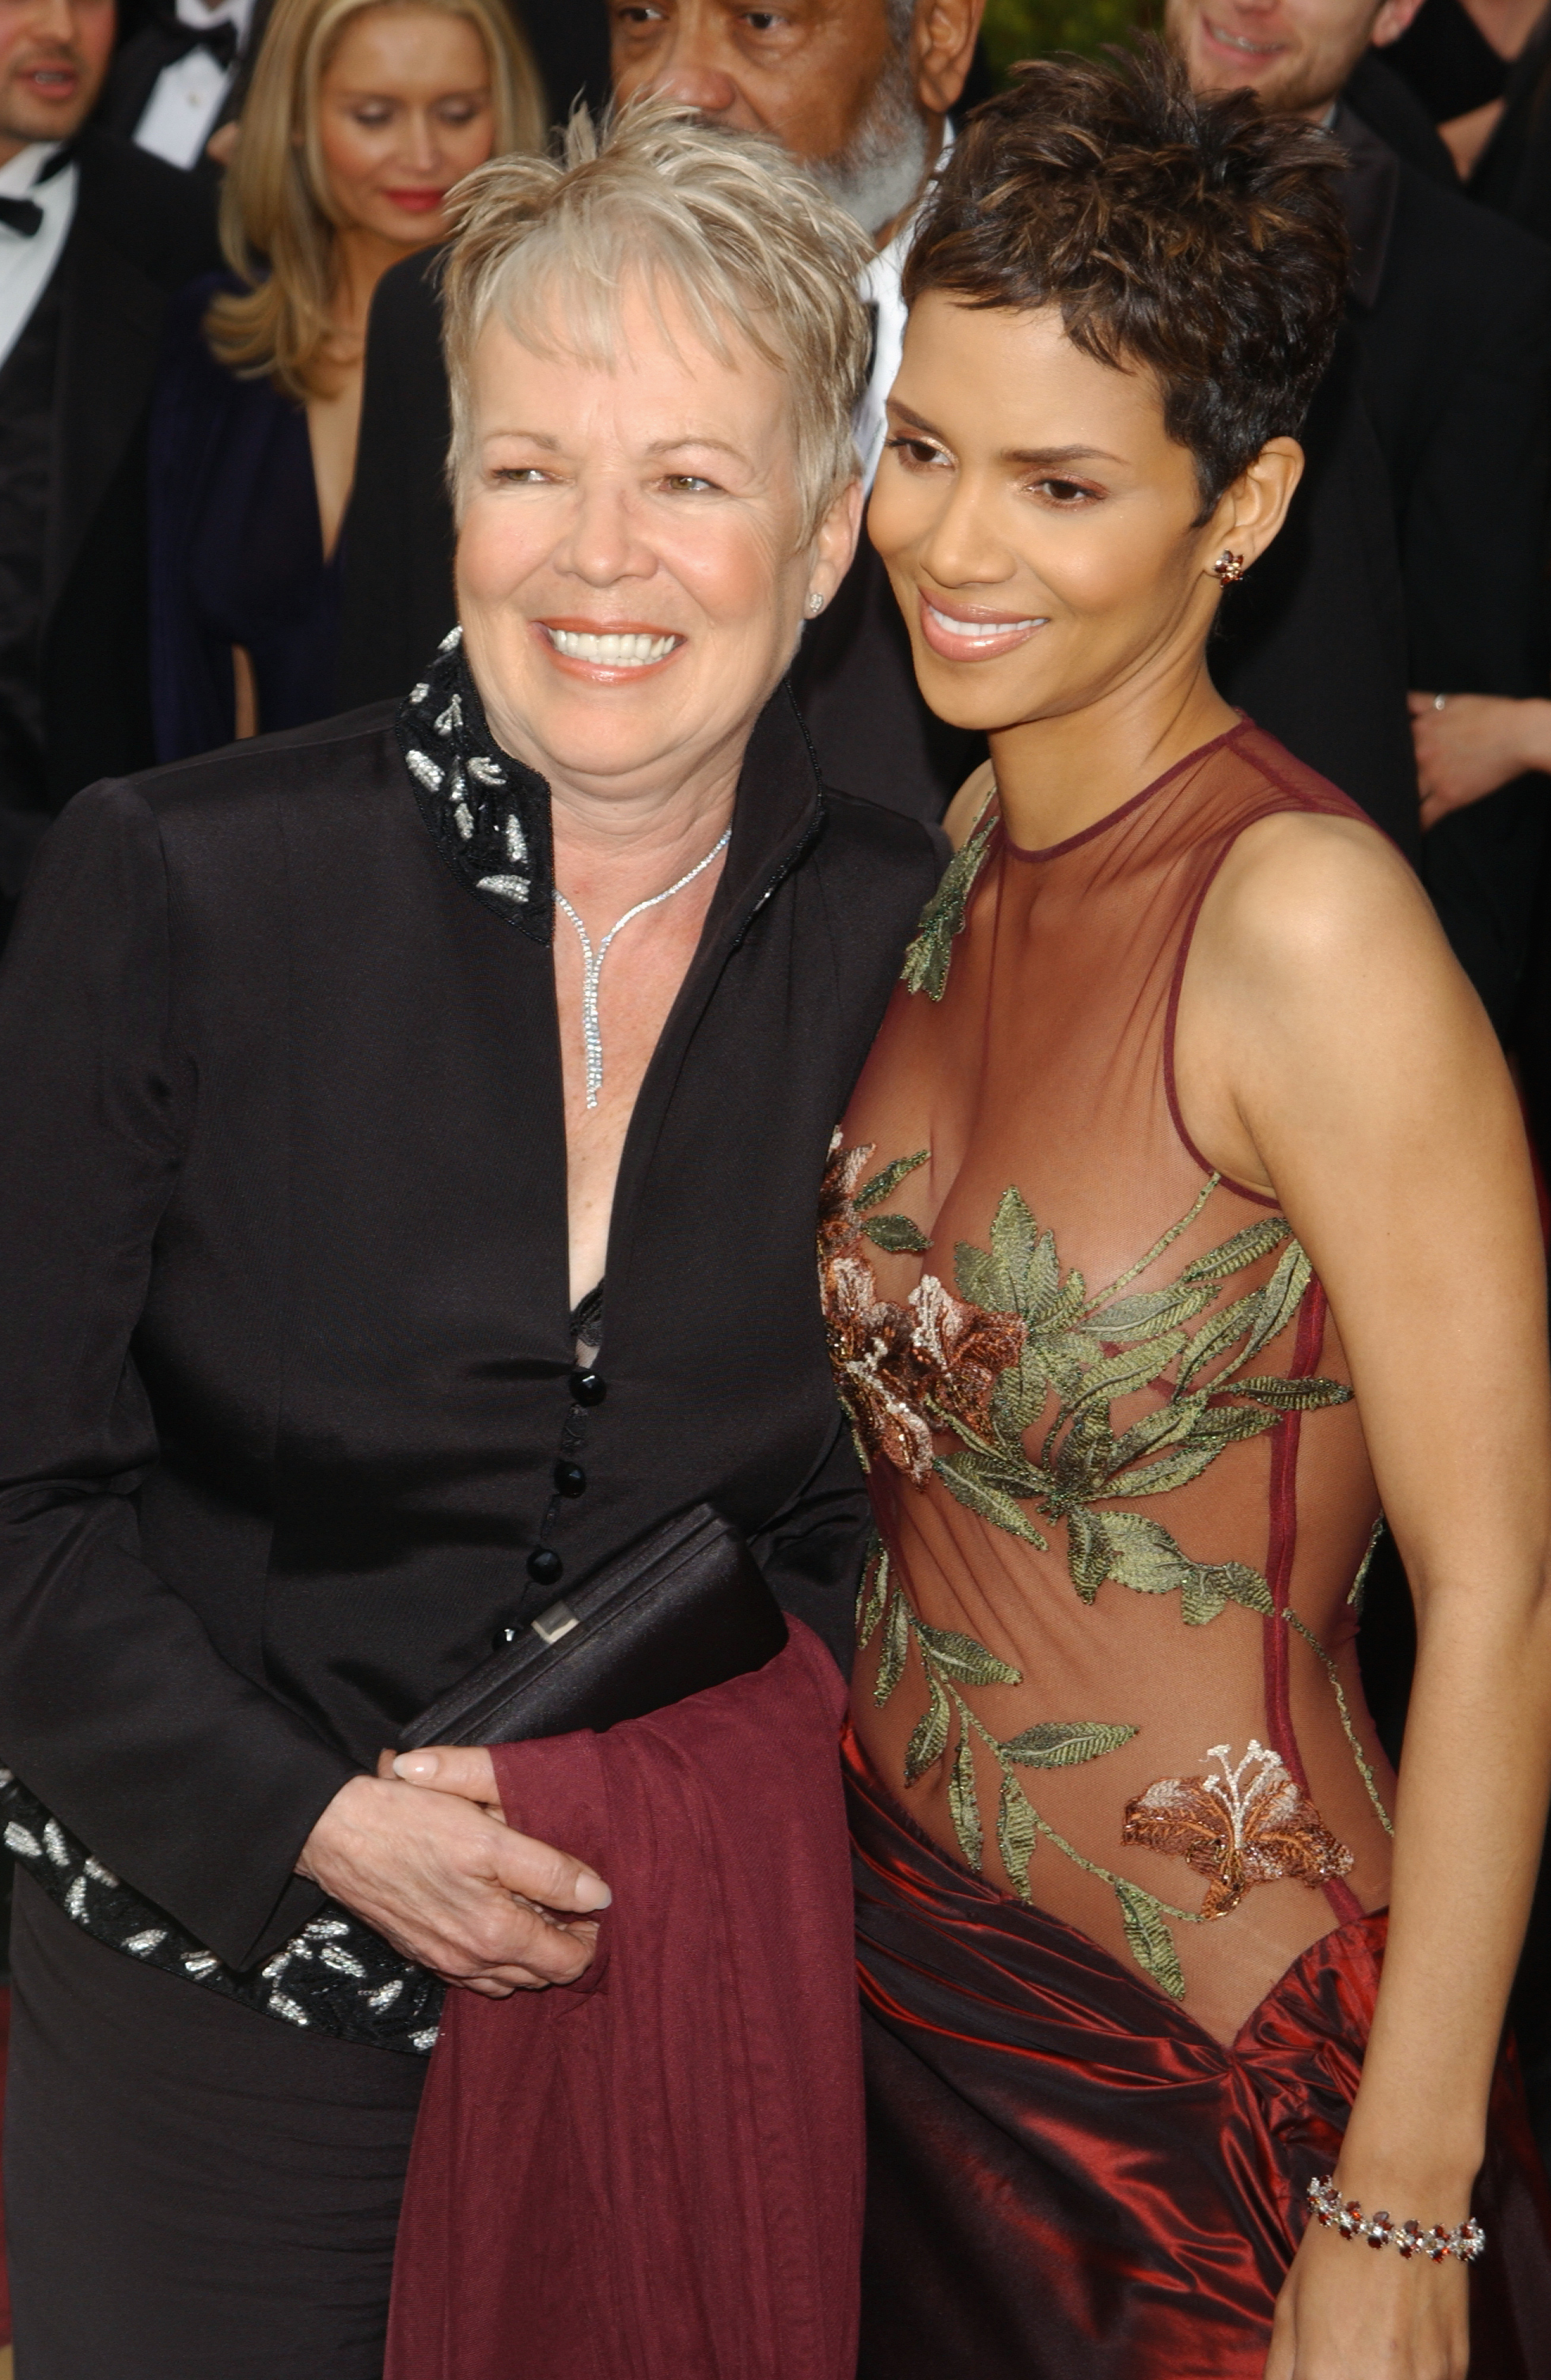 Halle Berry and her mother Judith Ann Hawkins Berry arrive at the 74th annual Academy Awards on March 24, 2002, in Los Angeles, California. | Source: Getty Images